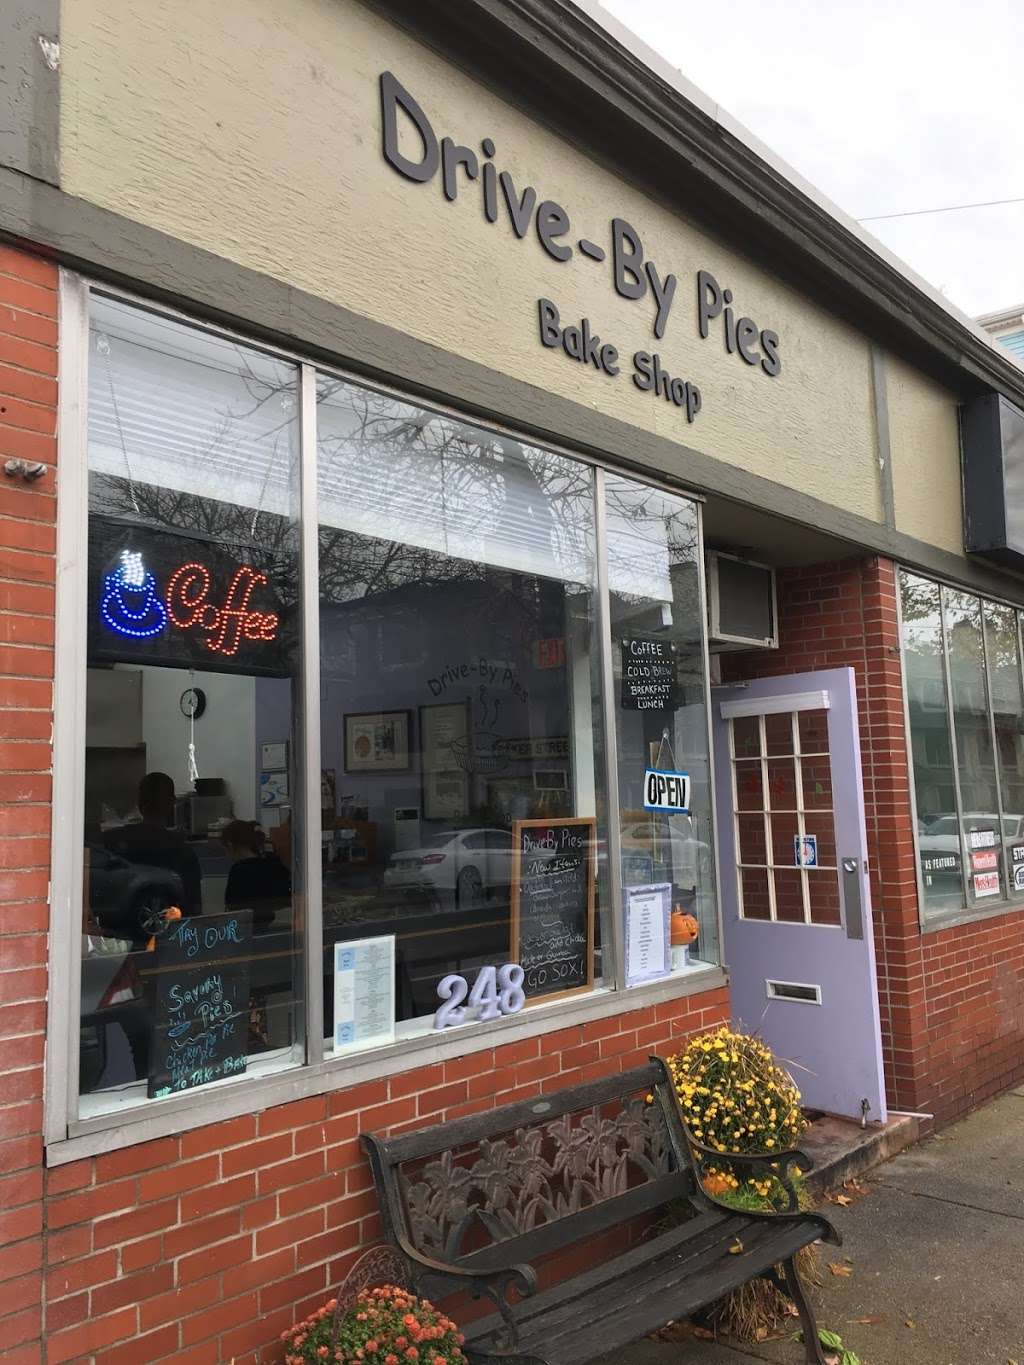 Drive-By Pies | 248A Cypress St, Brookline, MA 02445 | Phone: (617) 879-6210